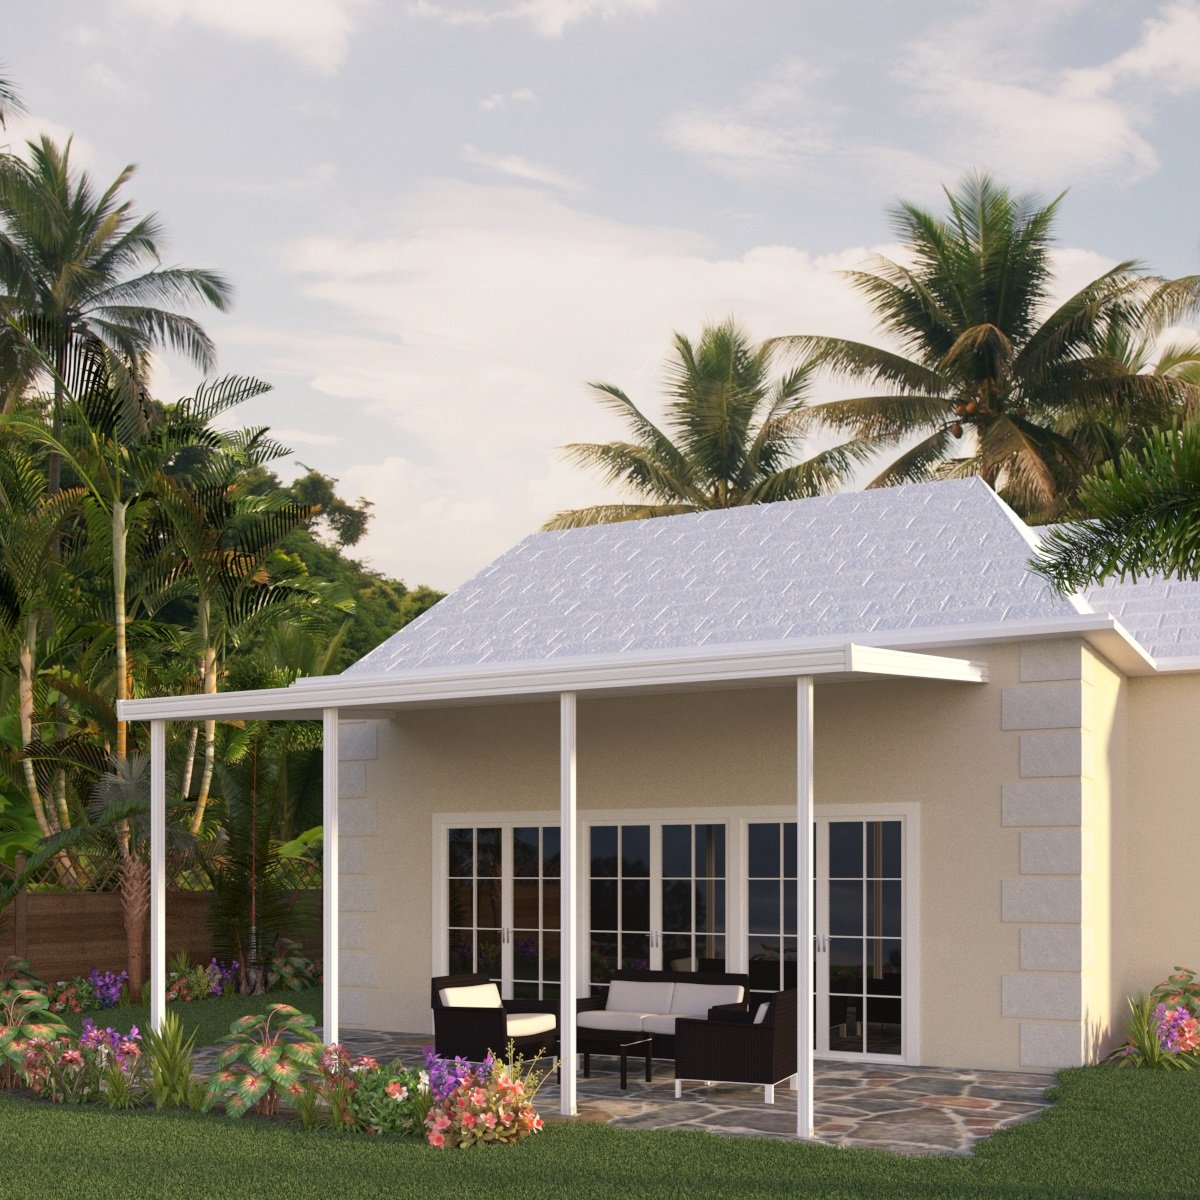 10 ft. Deep x 26 ft. Wide White Attached Aluminum Patio Cover -4 Posts - (10lb Low Snow Area)